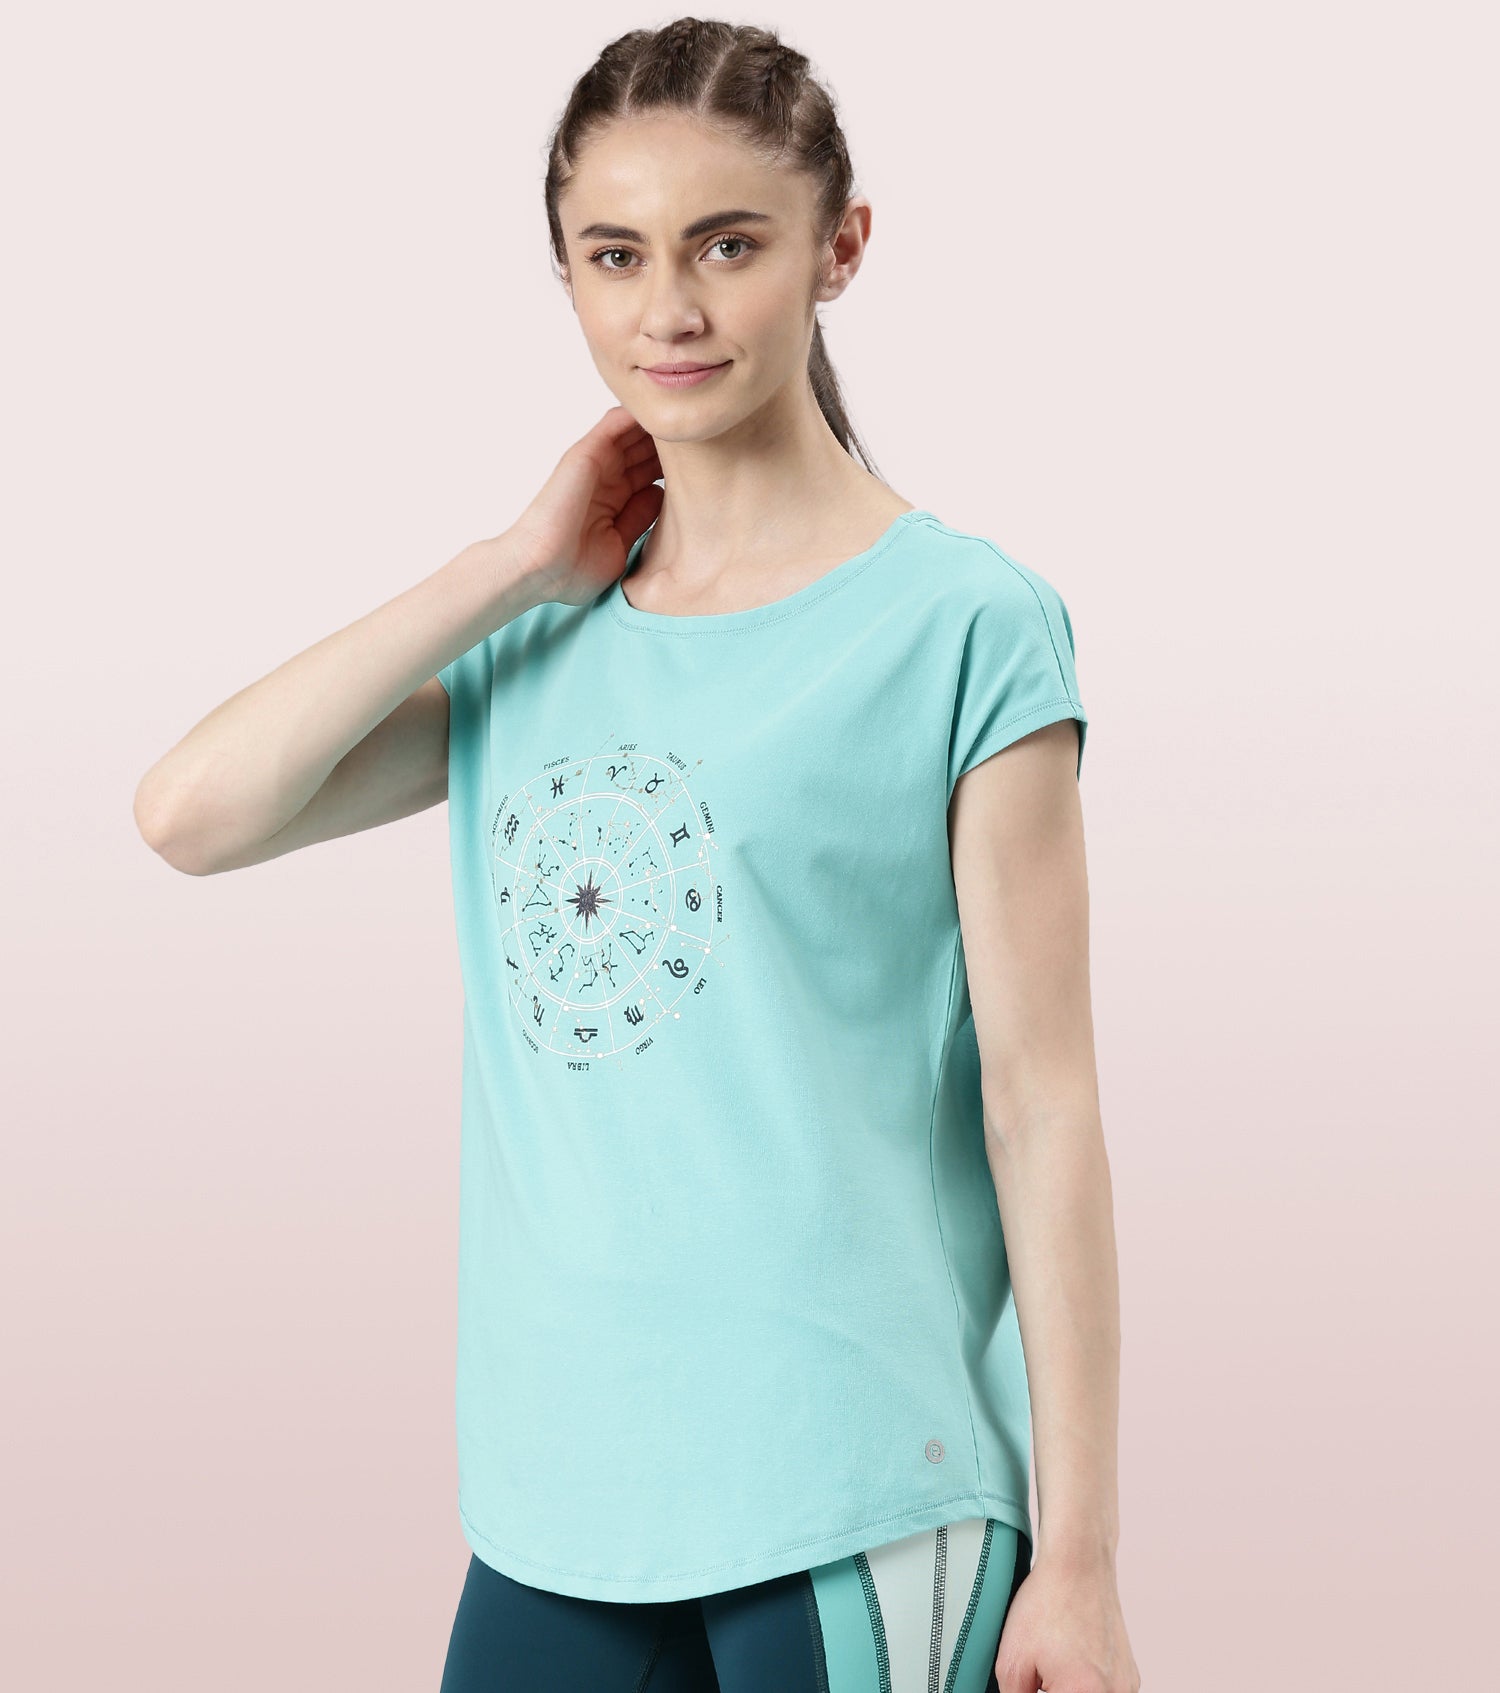 Enamor Meditate Anti-Odour Stretch Cotton Tee For Women | Graphic Printed Tee With Dolman Sleeve & Boat Neck Design | Candy Red Universe Graphic